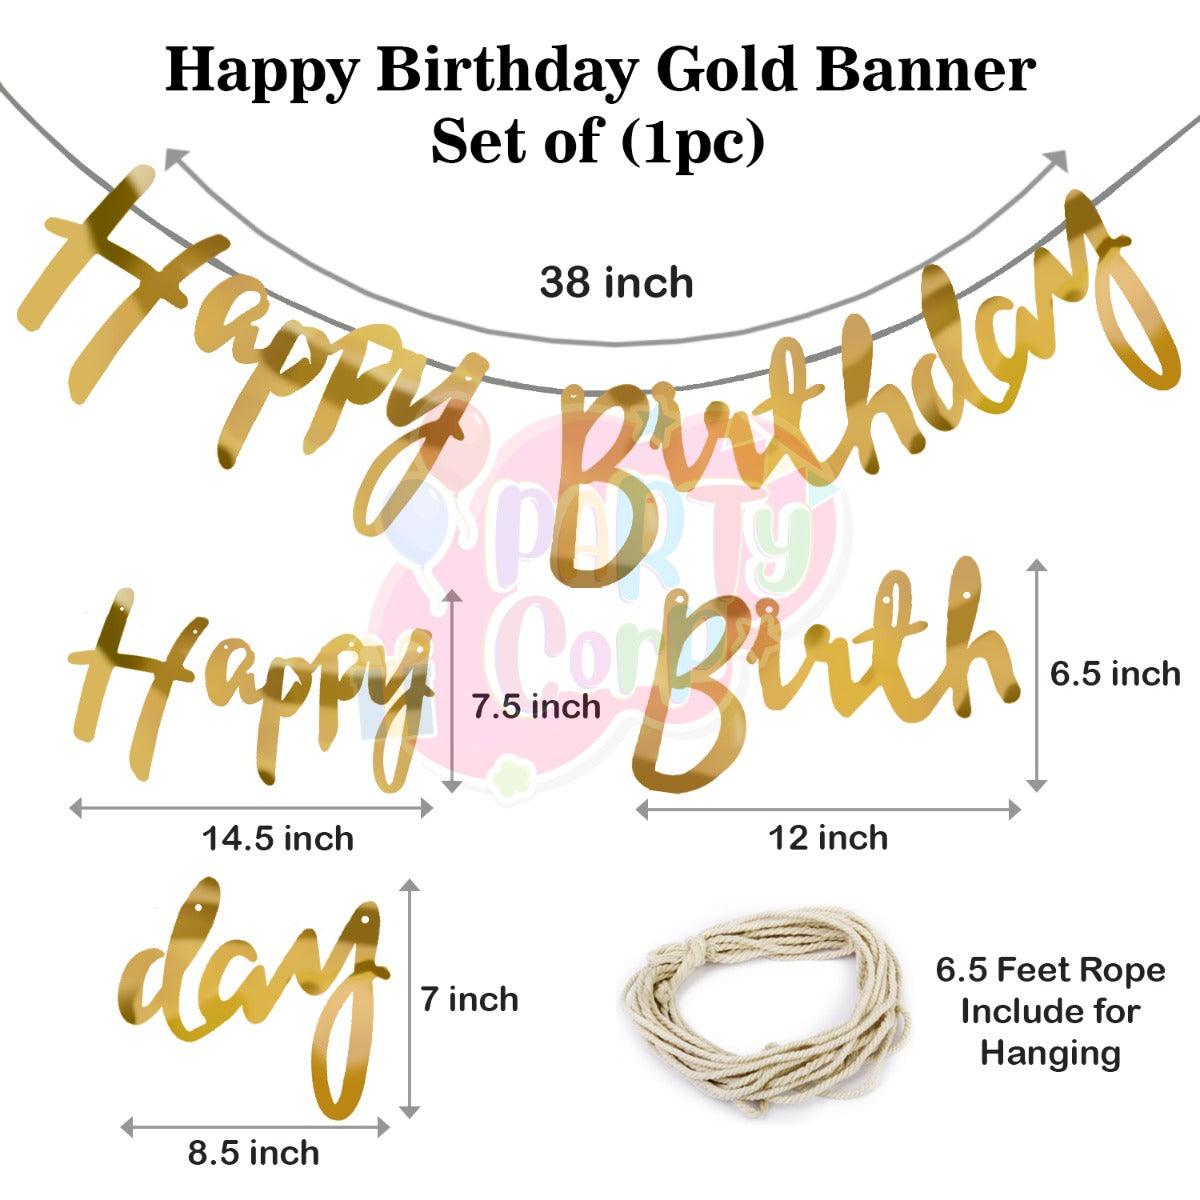 PartyCorp Happy Birthday Decoration Kit Combo 11 Pcs - Gold Confetti Balloon, Gold Happy Birthday Alphabets Cut Out Banner